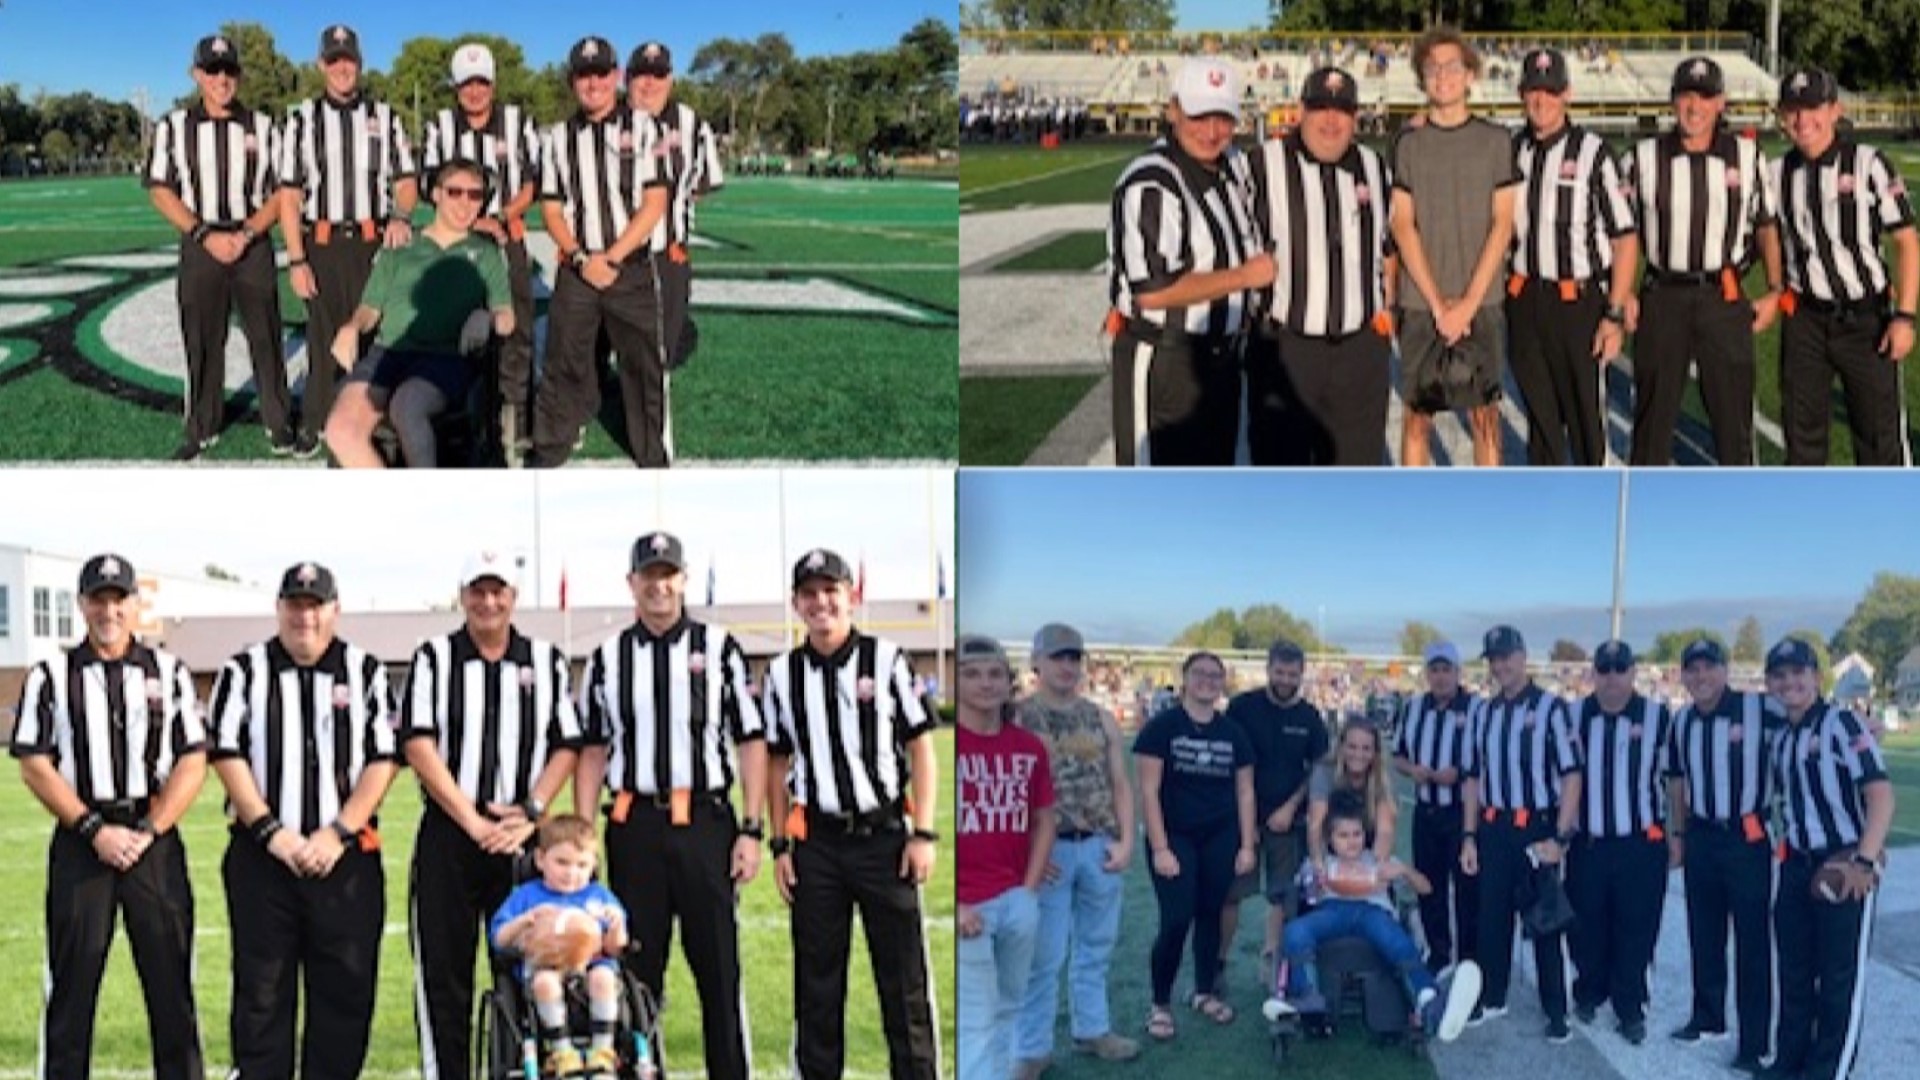 Thom Dartt, a Toledo native, began selecting kids to serve as honorary captains at high school football games to help humanize the profession of referees.